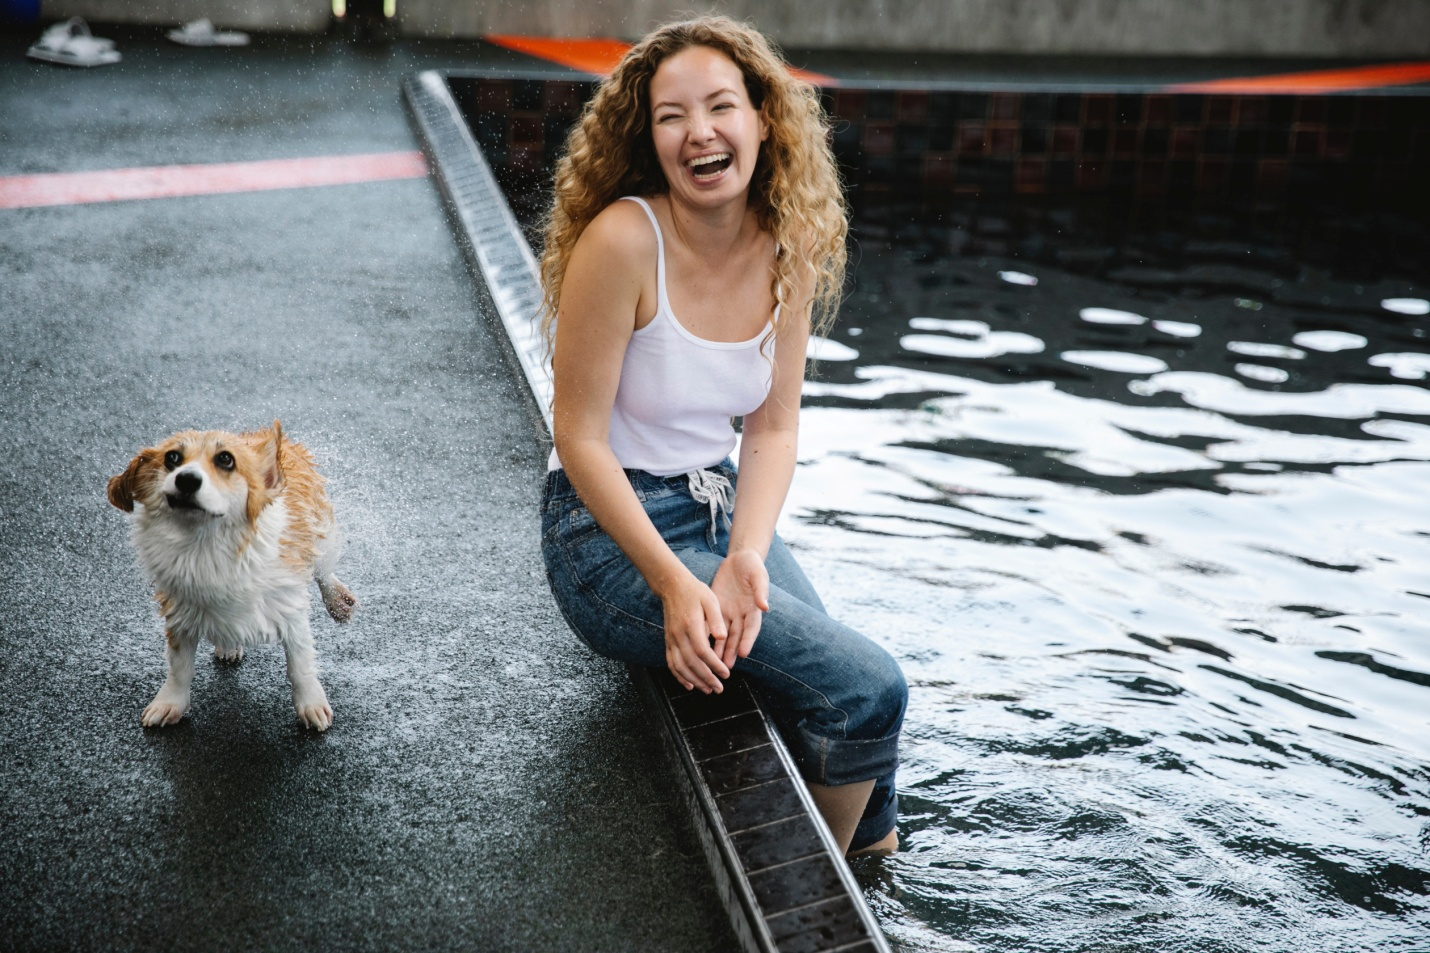 A woman smiling with her dog beside a pool